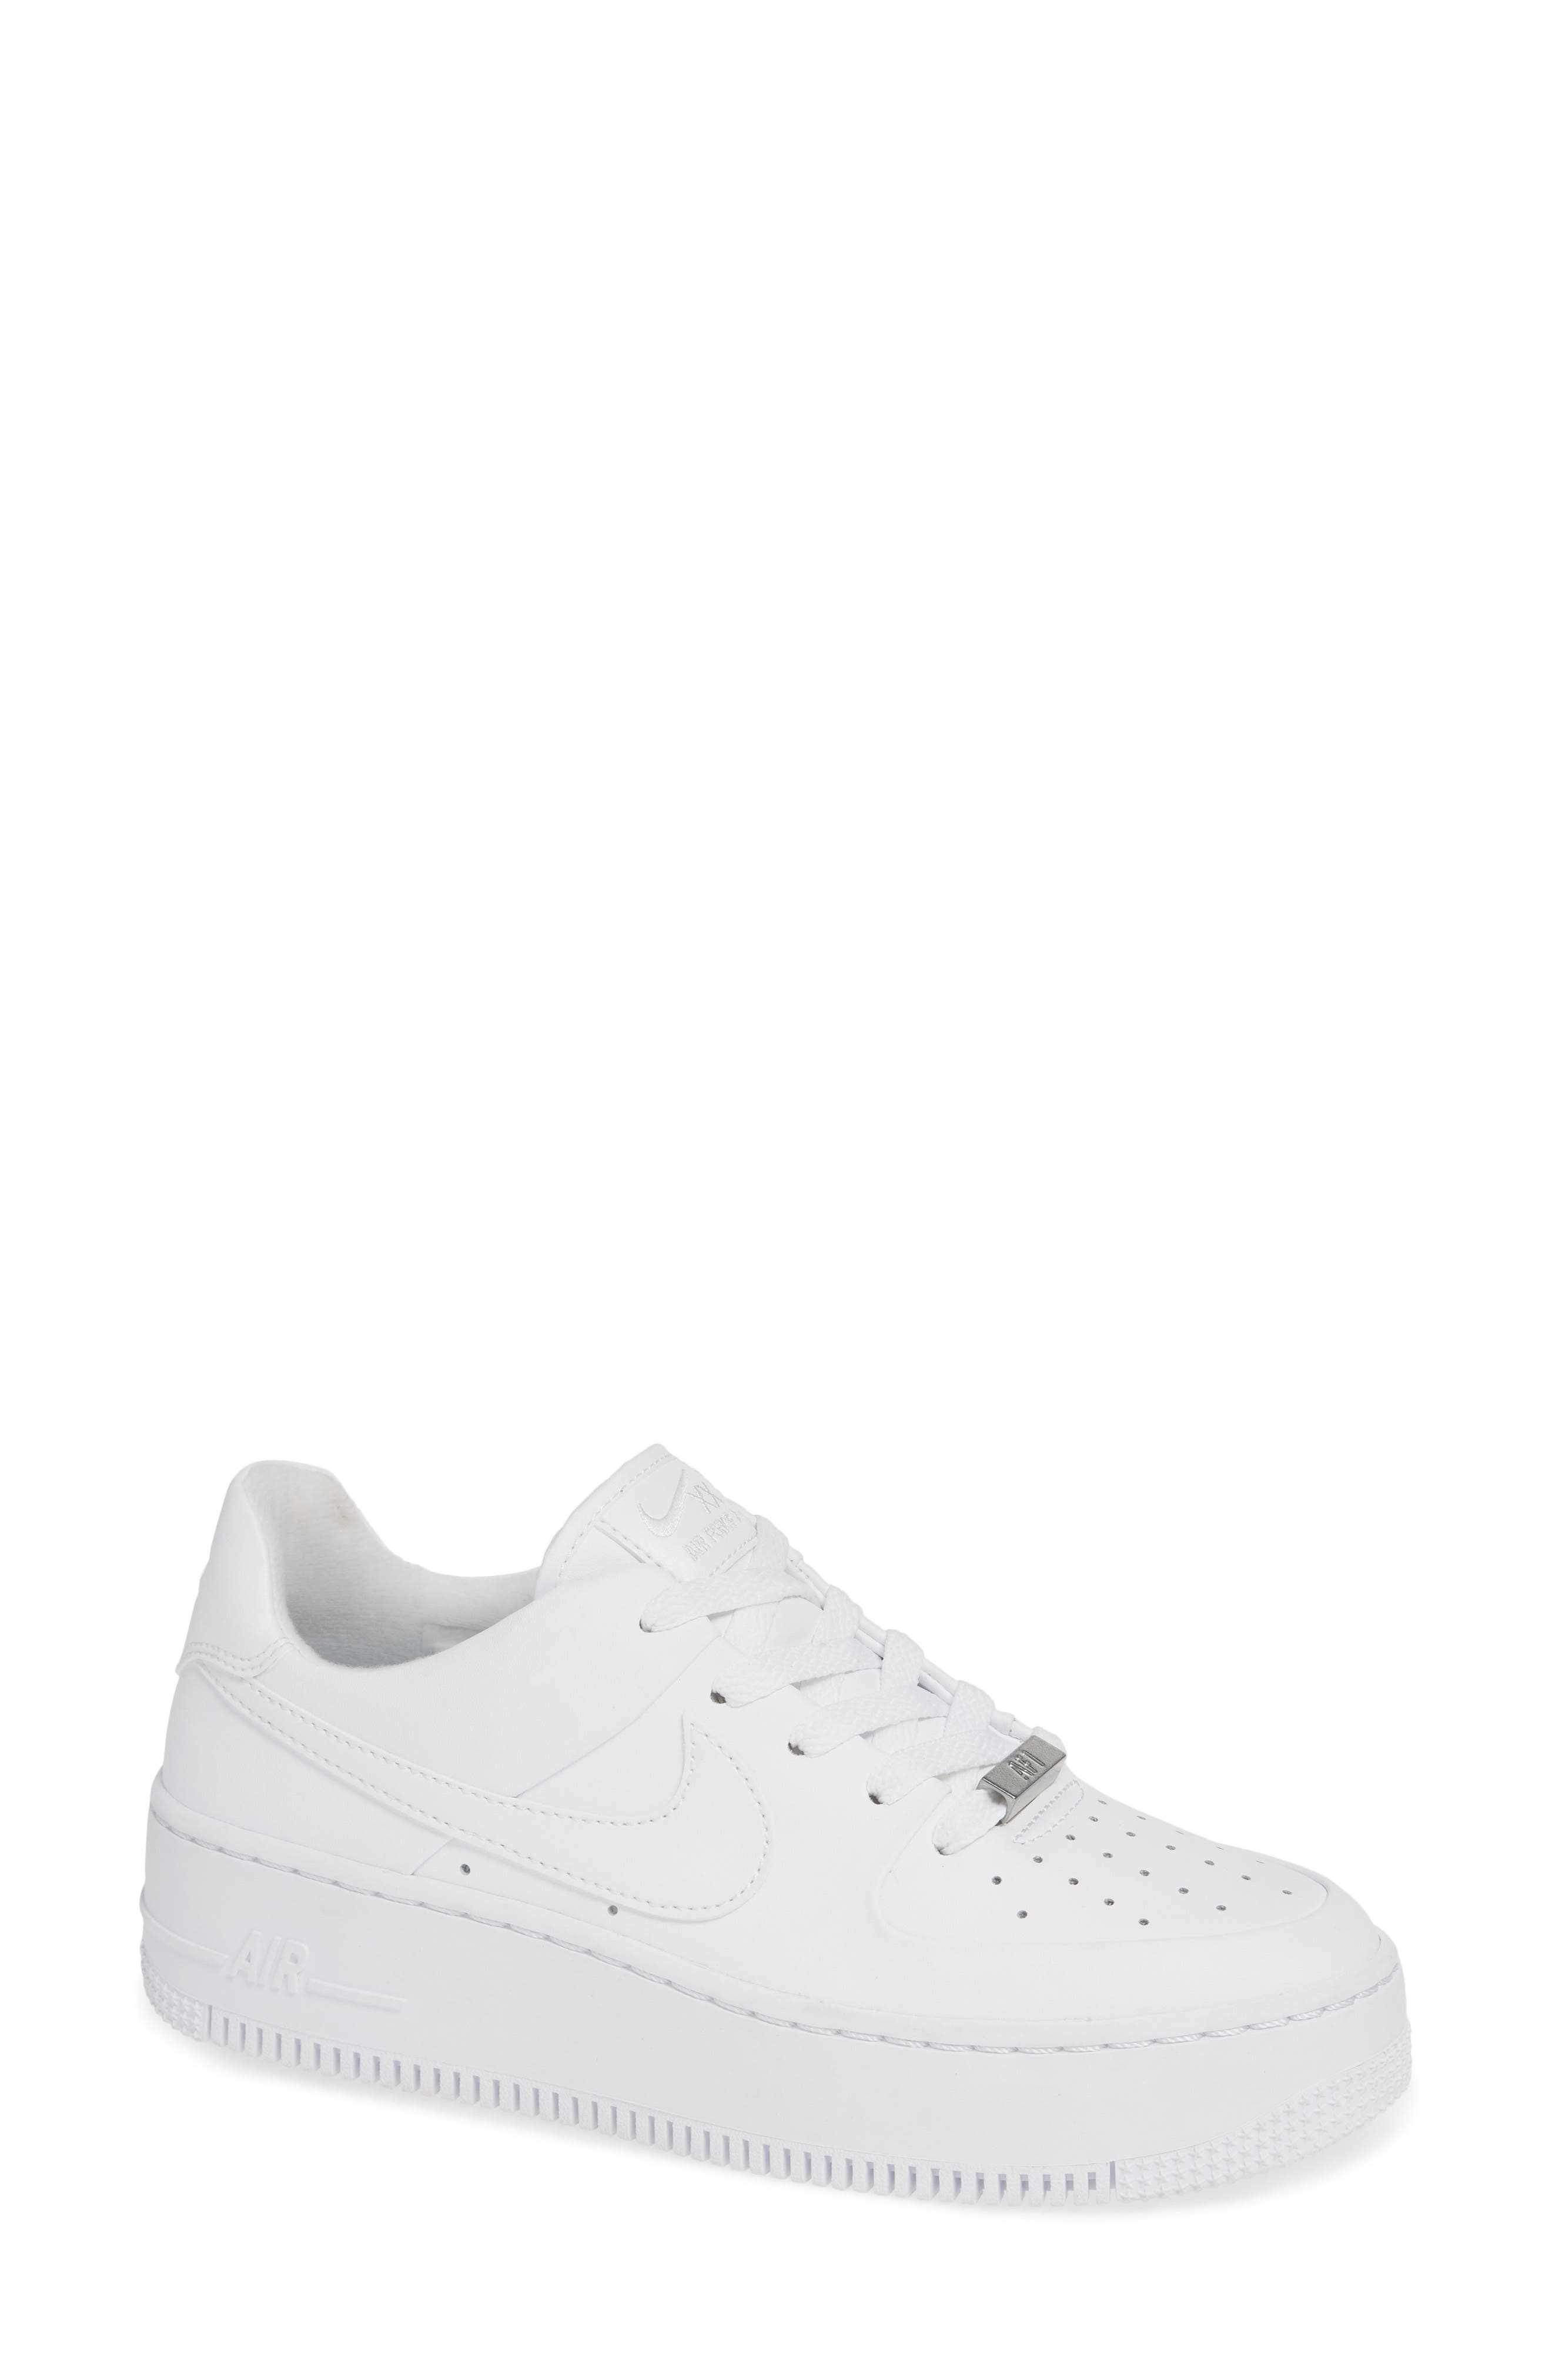 white bulky tennis shoes